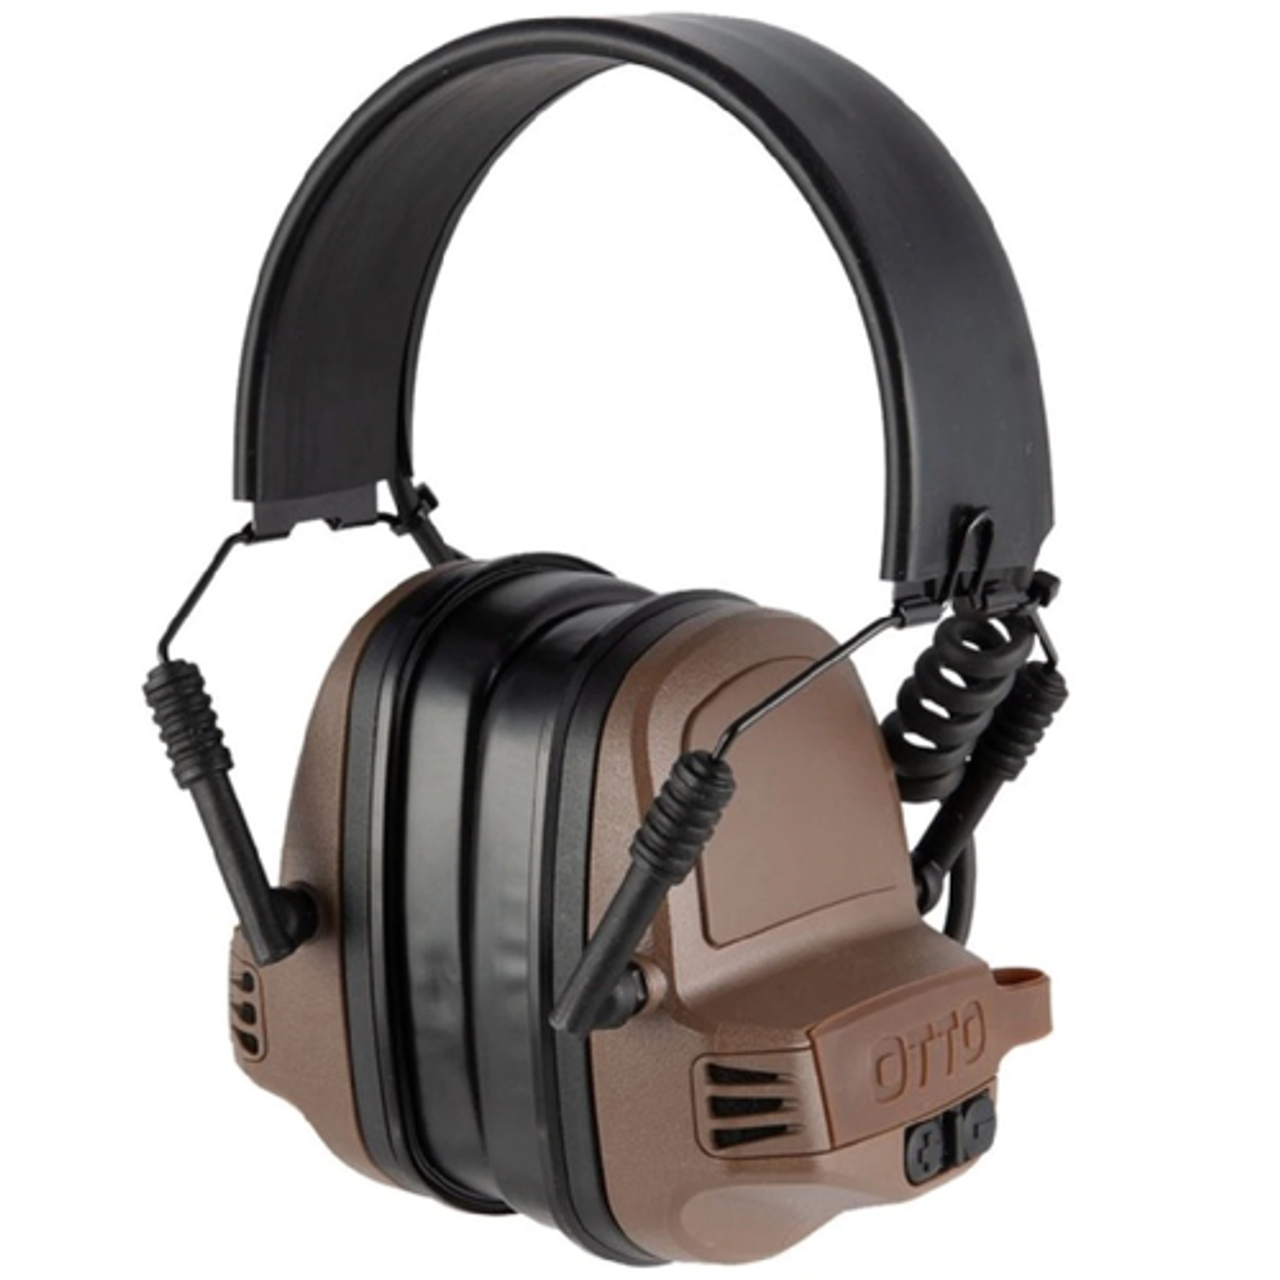 the Head Two Business Store Way V4-11072FD Range Wireless Radio OTTO SA HiTech - - Tactical Headset Over NoizeBarrier